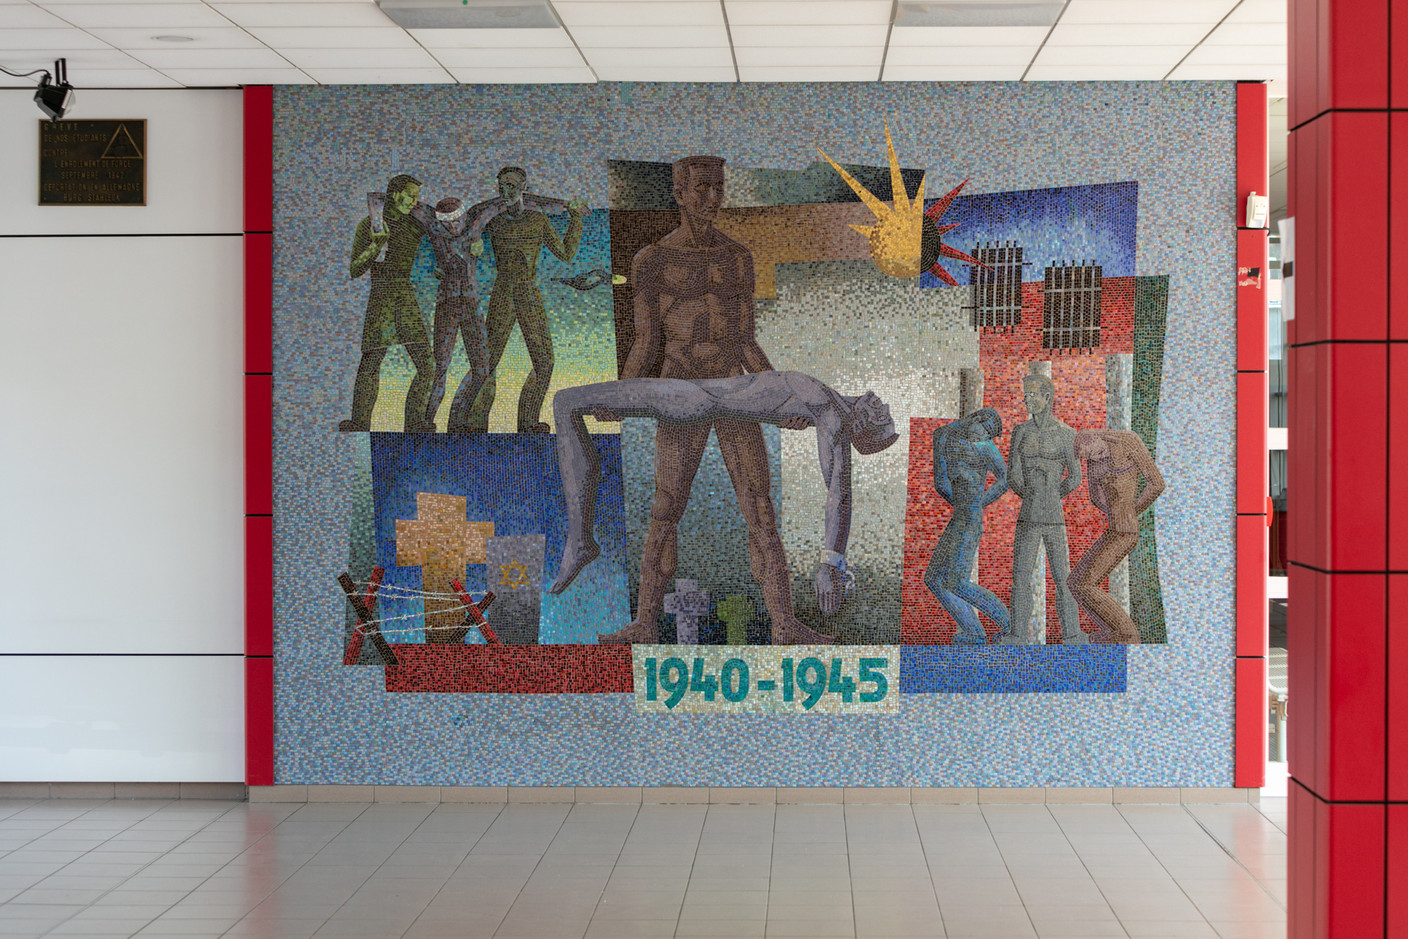 A mosaic by Foni Thissen in remembrance of WW2 Romain Gamba / Maison Moderne